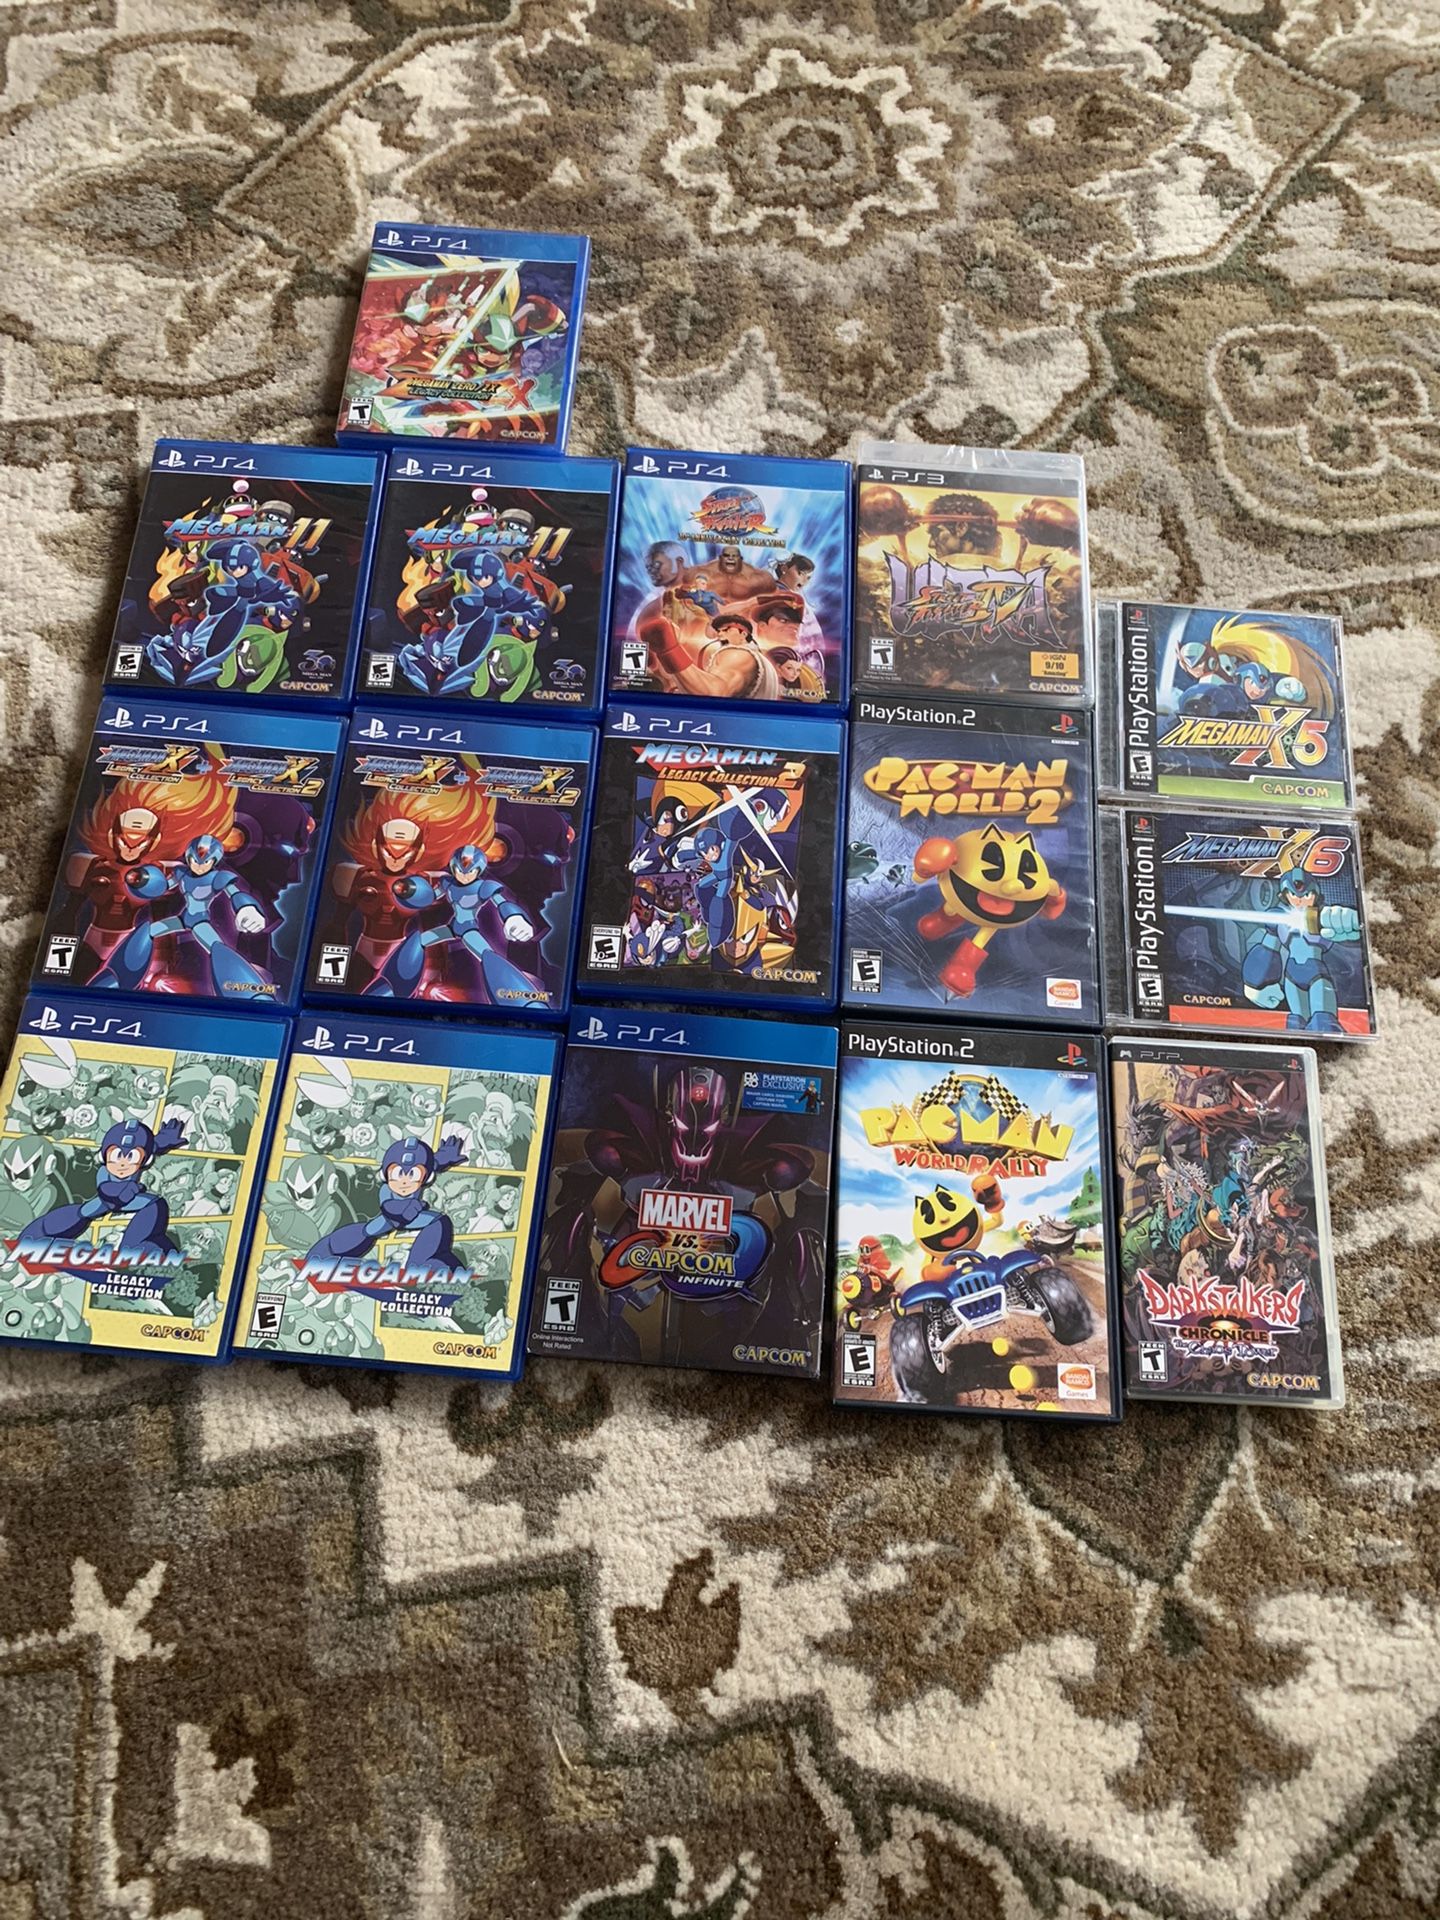 Sealed street fighter 4 ps3 brand new 85$ Megaman x6 ps1 45$ megaman x5 ps1 45$ Darkstalkers chaos tower ps1 35$ Rest are 20 dollars or less Pac-Man w